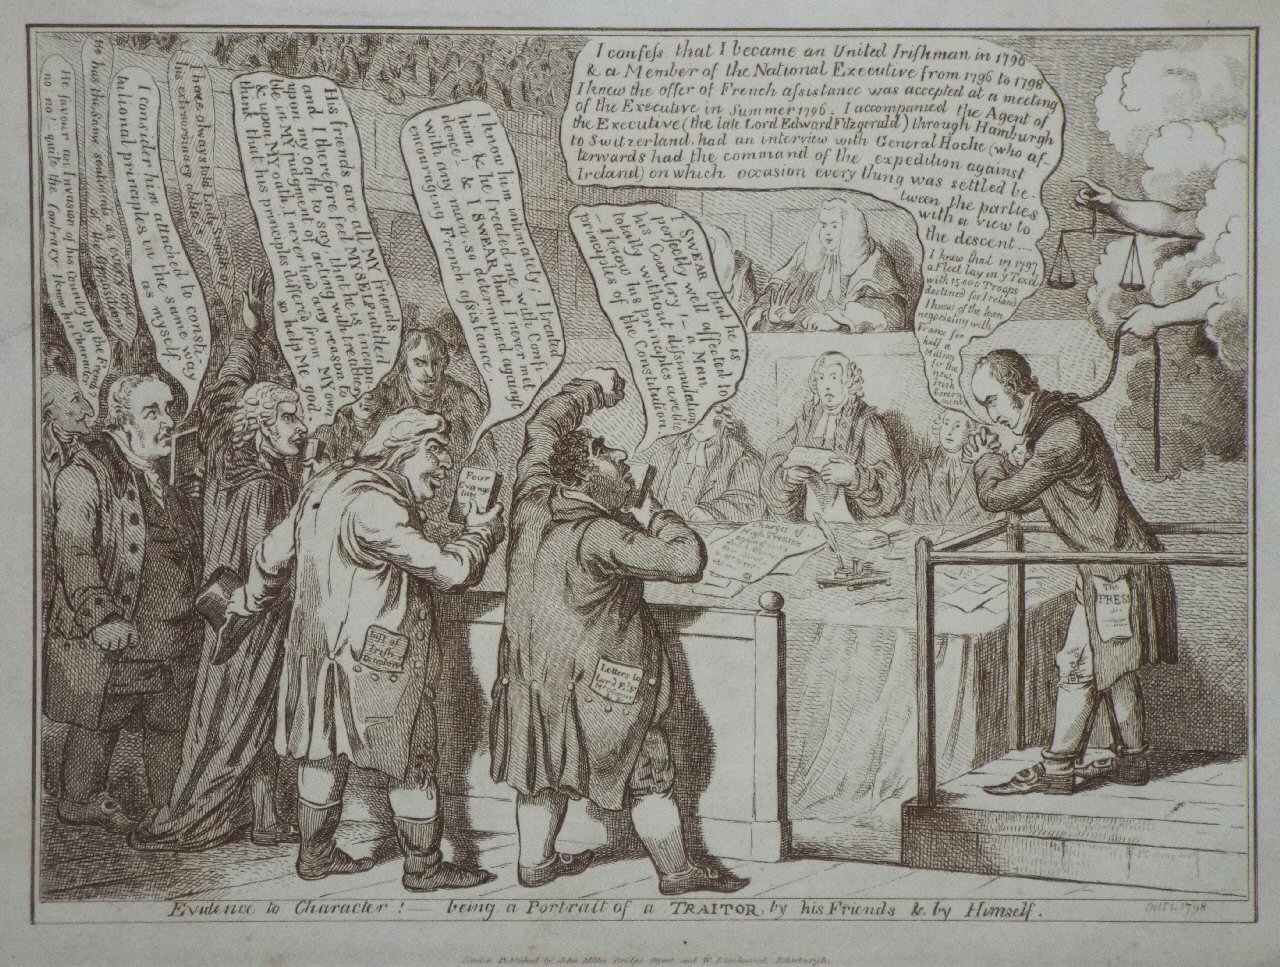 Aquatint - Evidence to Character! being a Portrait of a Traitor, by his Friends & by Himself.